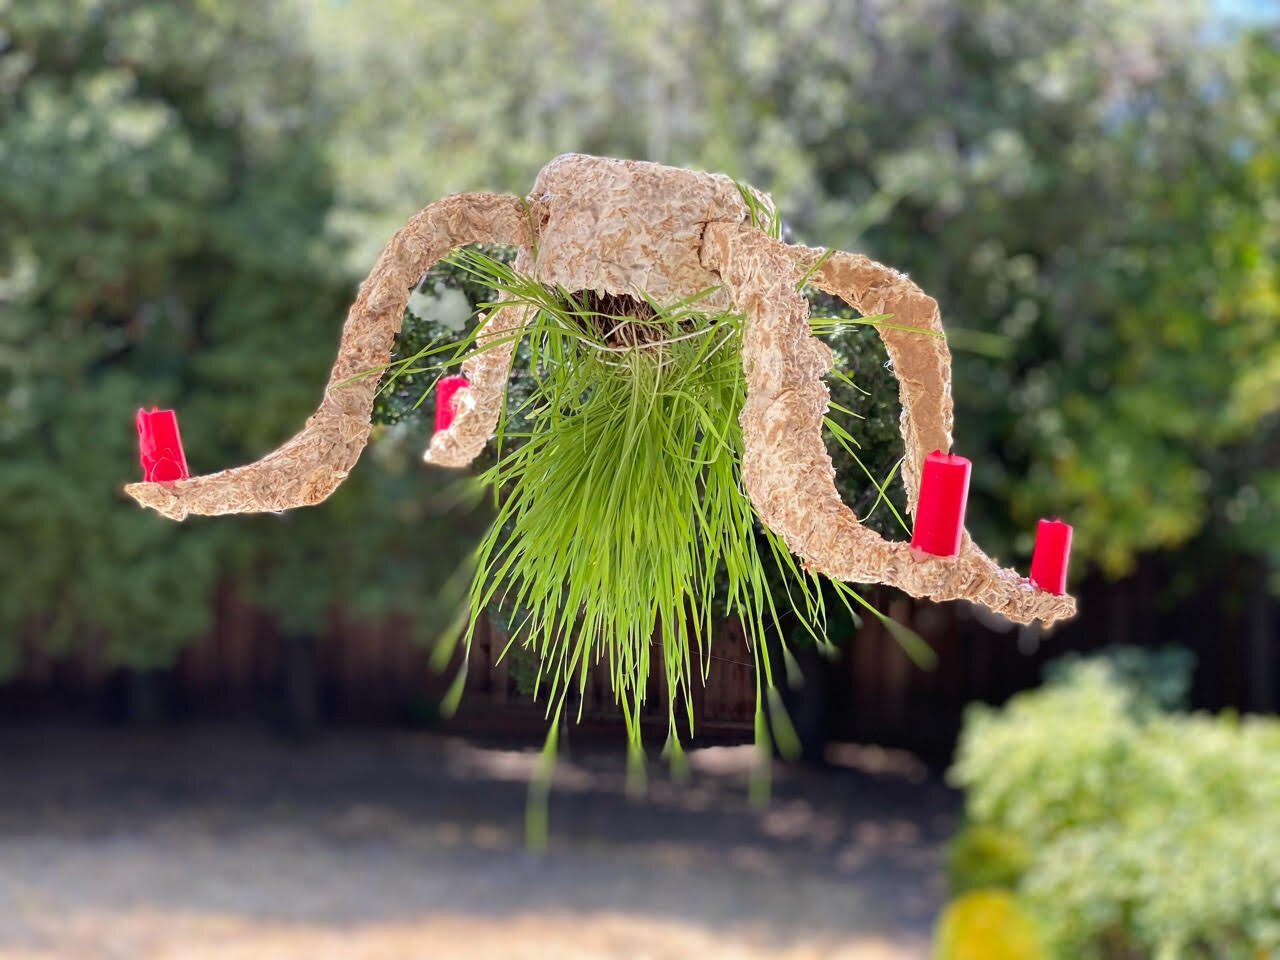 A drone like structure made of wheatgrass and mycelium, designed by a ONE Lab student (Copy)